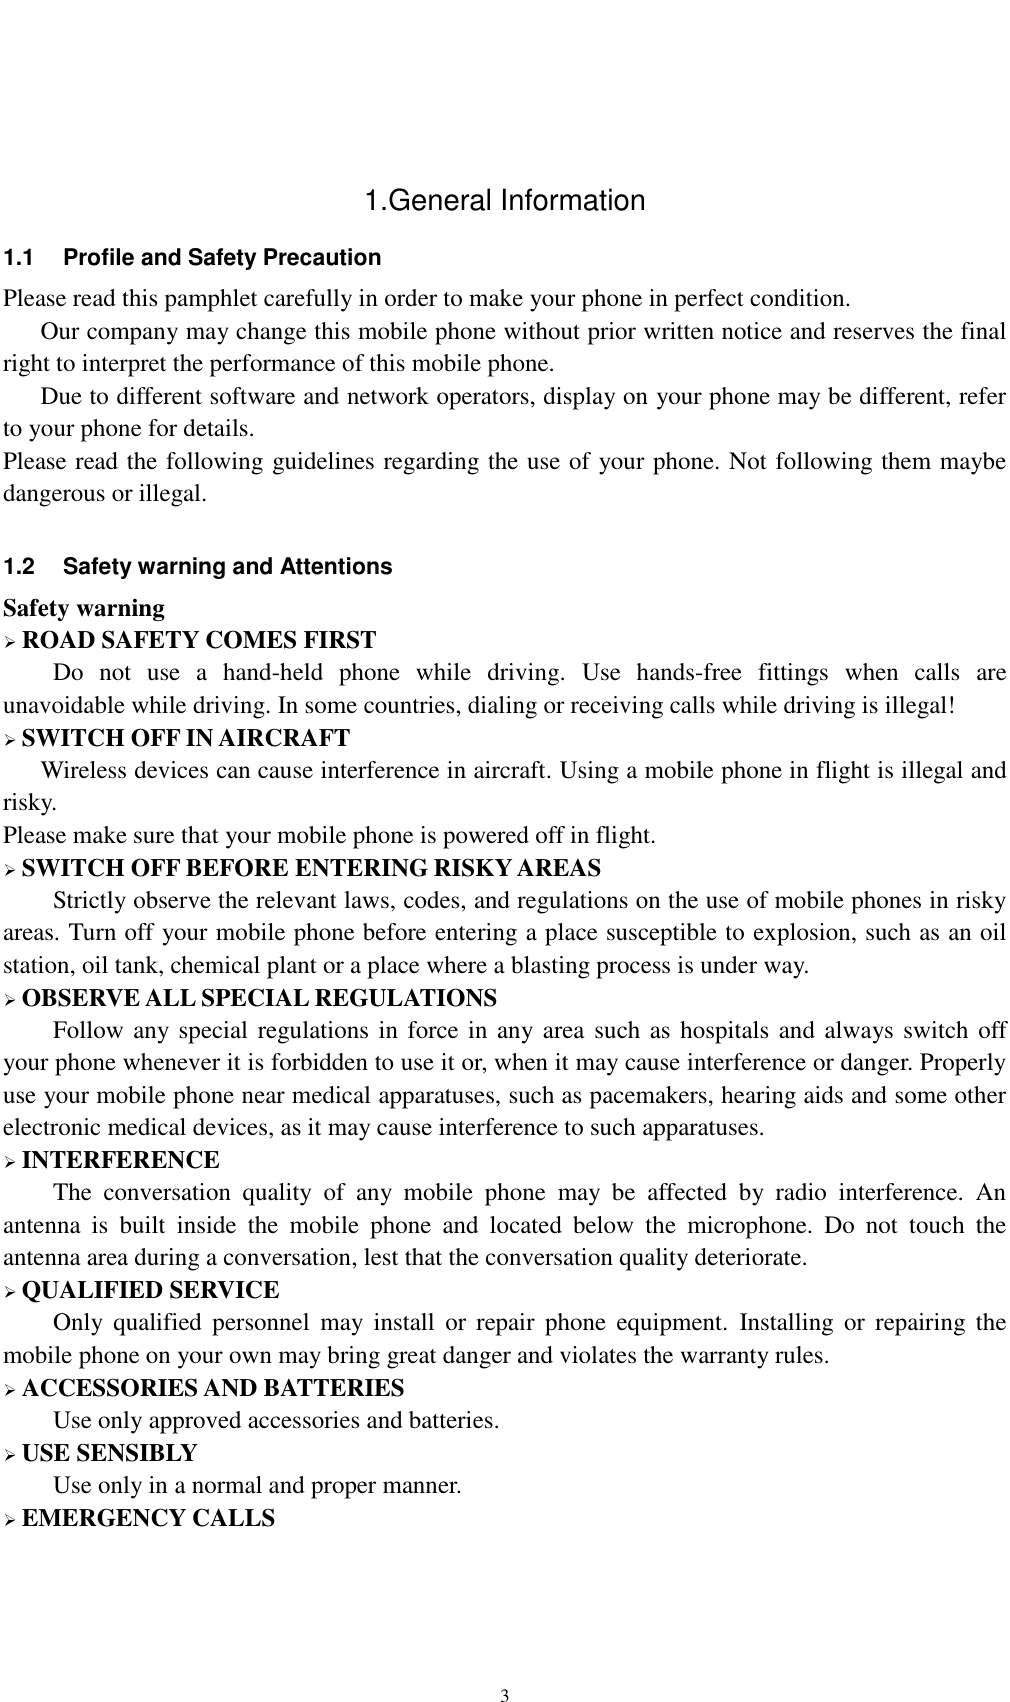    3  1.General Information 1.1  Profile and Safety Precaution Please read this pamphlet carefully in order to make your phone in perfect condition.    Our company may change this mobile phone without prior written notice and reserves the final right to interpret the performance of this mobile phone.    Due to different software and network operators, display on your phone may be different, refer to your phone for details. Please read the following guidelines regarding the use of your phone. Not following them maybe dangerous or illegal.  1.2  Safety warning and Attentions Safety warning  ROAD SAFETY COMES FIRST Do  not  use  a  hand-held  phone  while  driving.  Use  hands-free  fittings  when  calls  are unavoidable while driving. In some countries, dialing or receiving calls while driving is illegal!  SWITCH OFF IN AIRCRAFT Wireless devices can cause interference in aircraft. Using a mobile phone in flight is illegal and risky.     Please make sure that your mobile phone is powered off in flight.  SWITCH OFF BEFORE ENTERING RISKY AREAS Strictly observe the relevant laws, codes, and regulations on the use of mobile phones in risky areas. Turn off your mobile phone before entering a place susceptible to explosion, such as an oil station, oil tank, chemical plant or a place where a blasting process is under way.  OBSERVE ALL SPECIAL REGULATIONS Follow any special regulations in force in any  area  such as hospitals and always switch off your phone whenever it is forbidden to use it or, when it may cause interference or danger. Properly use your mobile phone near medical apparatuses, such as pacemakers, hearing aids and some other electronic medical devices, as it may cause interference to such apparatuses.  INTERFERENCE The  conversation  quality  of  any  mobile  phone  may  be  affected  by  radio  interference.  An antenna  is  built  inside  the  mobile  phone  and  located  below  the  microphone.  Do  not  touch  the antenna area during a conversation, lest that the conversation quality deteriorate.  QUALIFIED SERVICE Only  qualified  personnel  may  install  or  repair  phone  equipment.  Installing  or  repairing  the mobile phone on your own may bring great danger and violates the warranty rules.  ACCESSORIES AND BATTERIES Use only approved accessories and batteries.  USE SENSIBLY Use only in a normal and proper manner.  EMERGENCY CALLS 